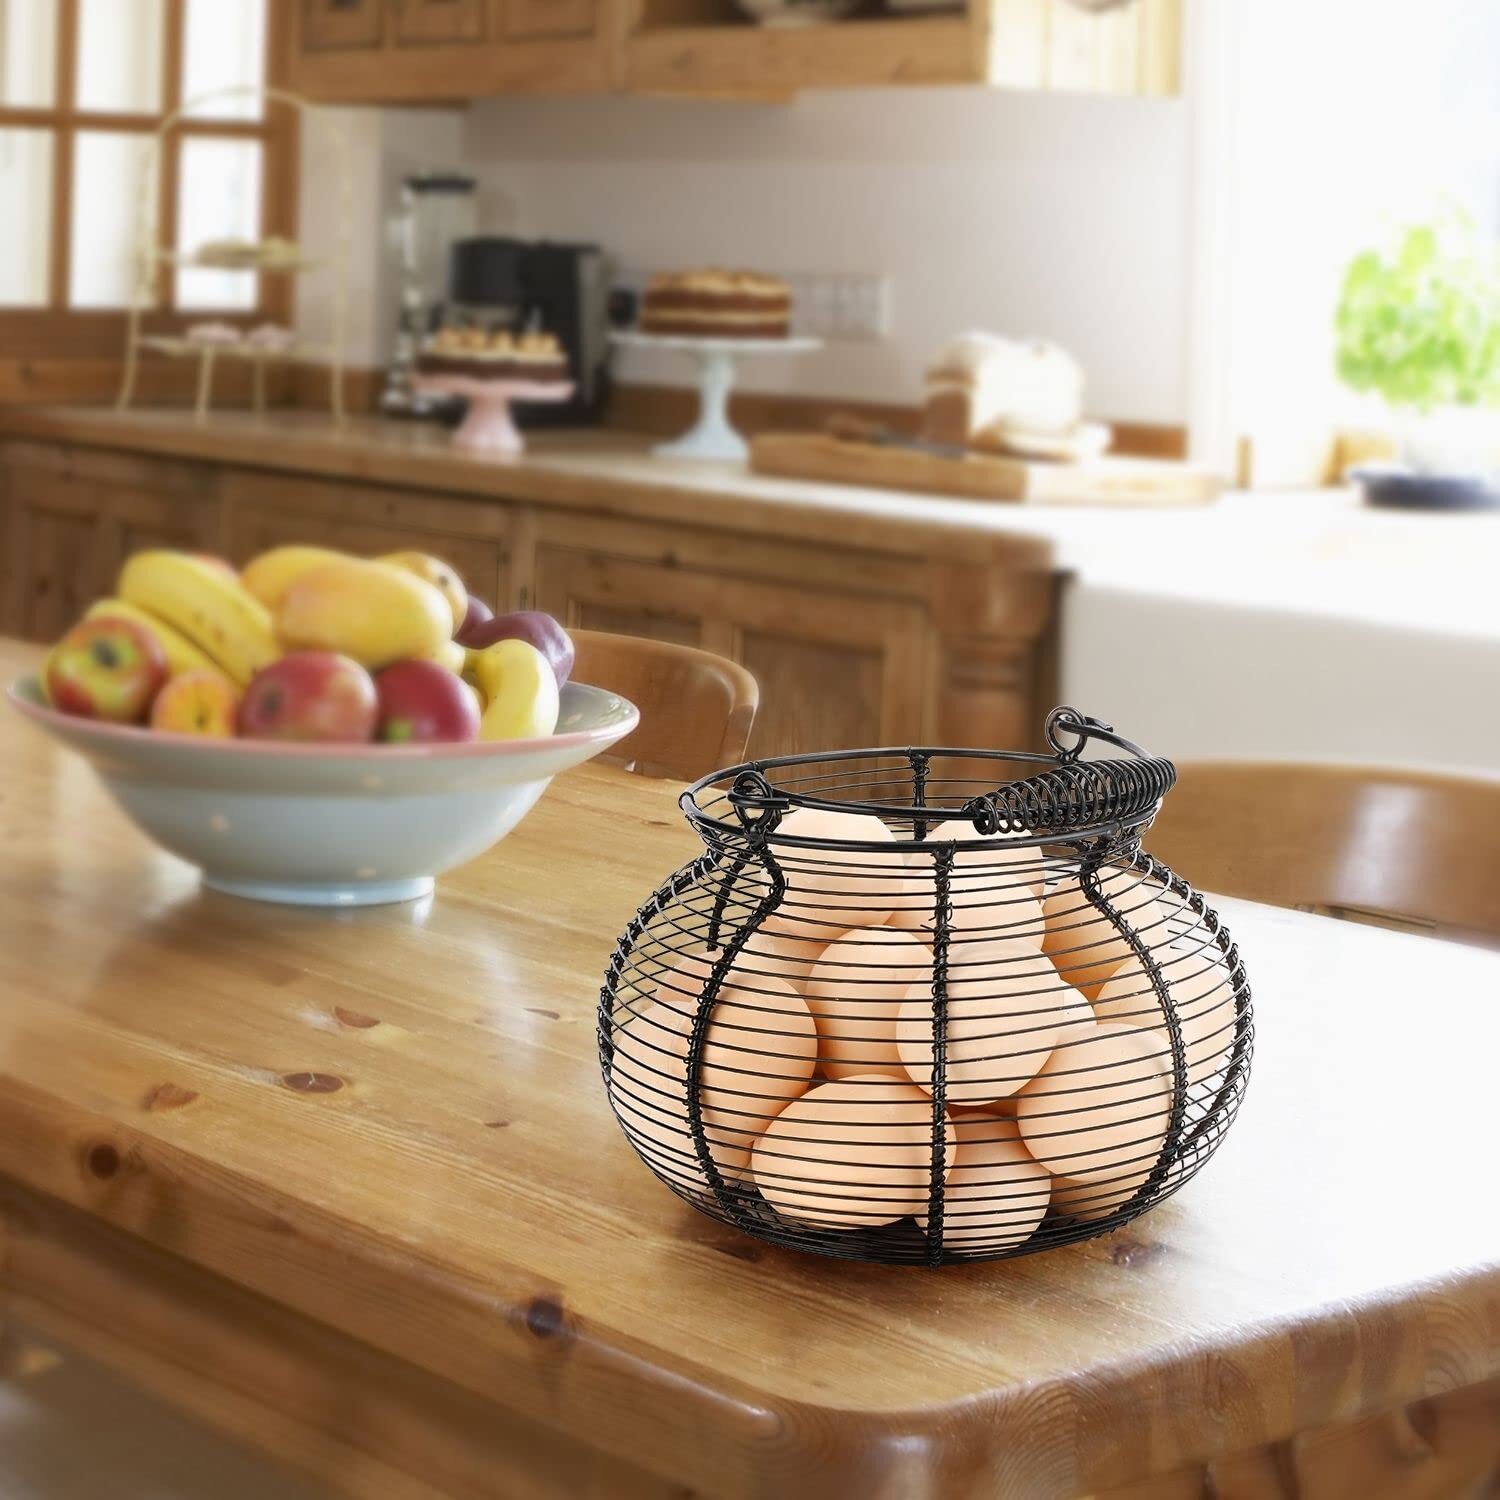 Egg Collecting Basket Round Wire Basket Chicken Egg Holder Black Farmhouse Rustic Decorative Egg Storage, Chicken Egg Basket for Gathering Fresh Eggs, Fruits, and Vegetables, with Handle